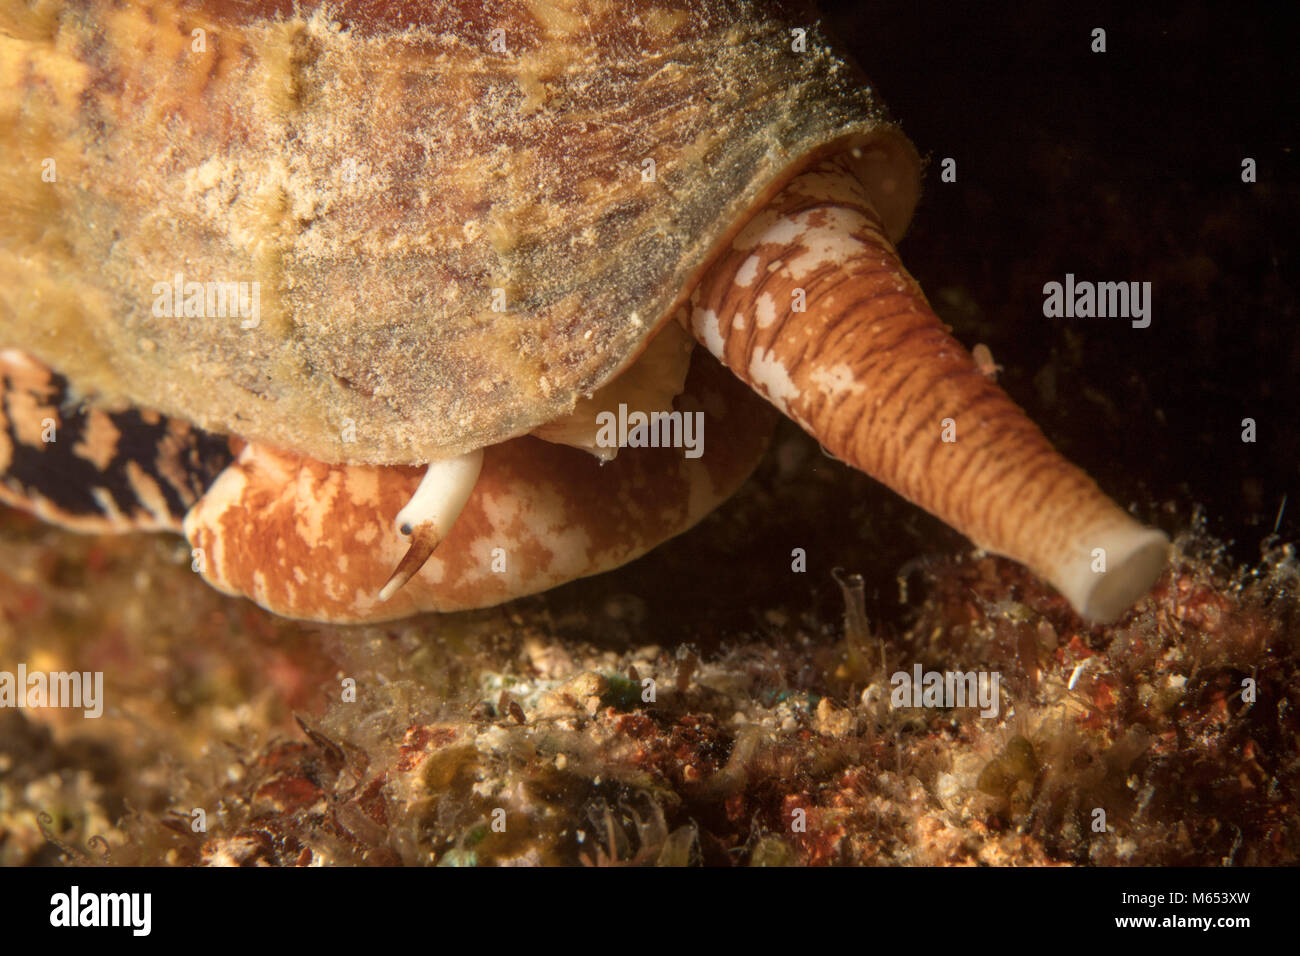 Conus geographus is the deadliest cone snail in the world. Here it is found hunting on a seamount in Papua New Guinea. Stock Photo